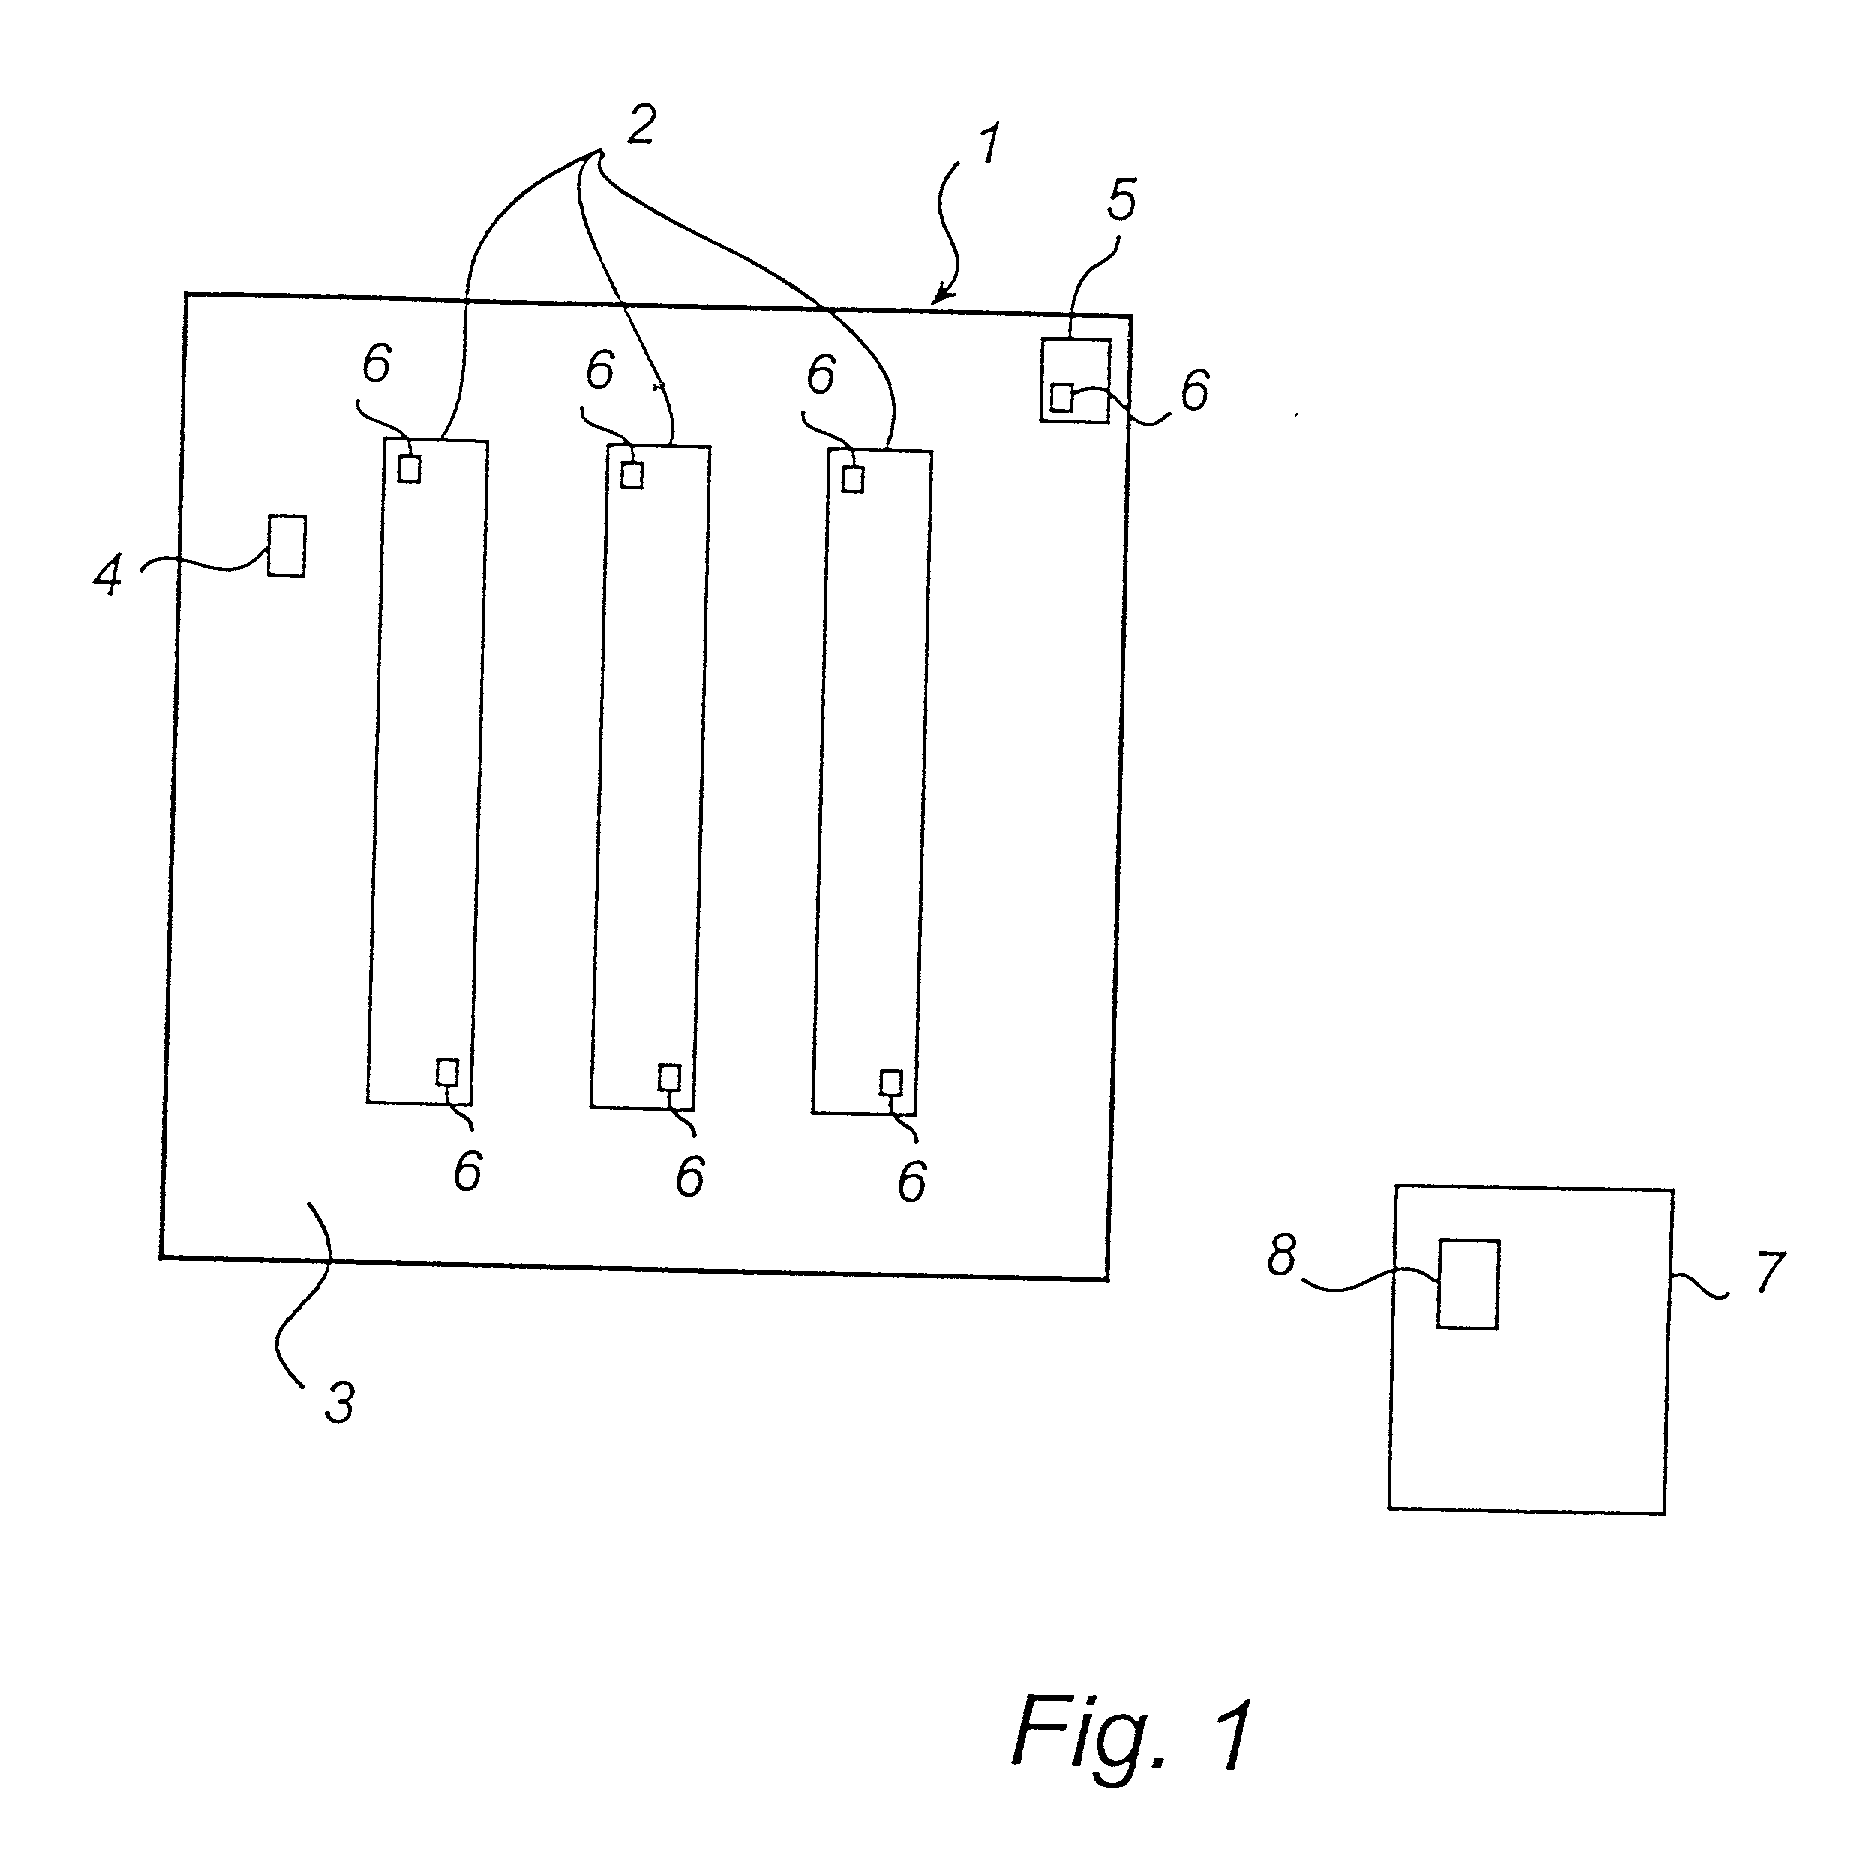 System and method for guiding a vehicle